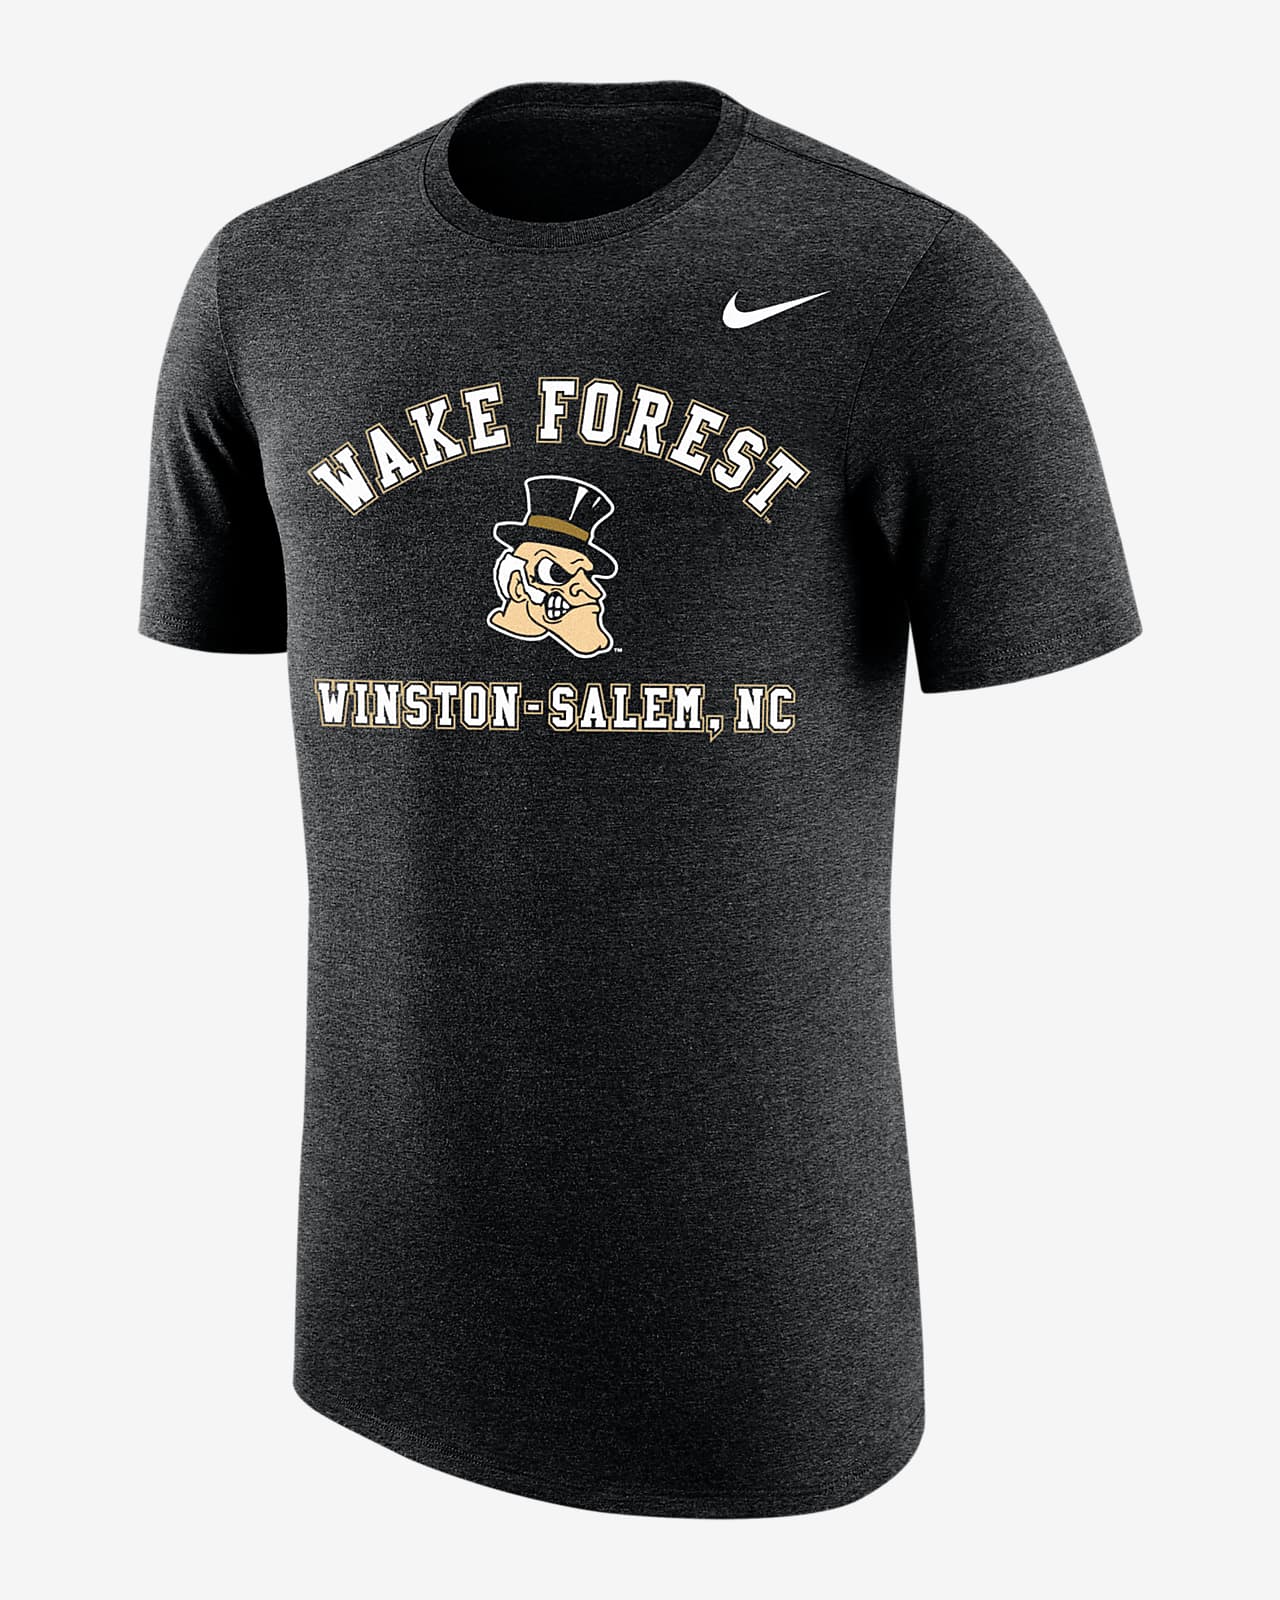 Wake Forest Men's Nike College T-Shirt